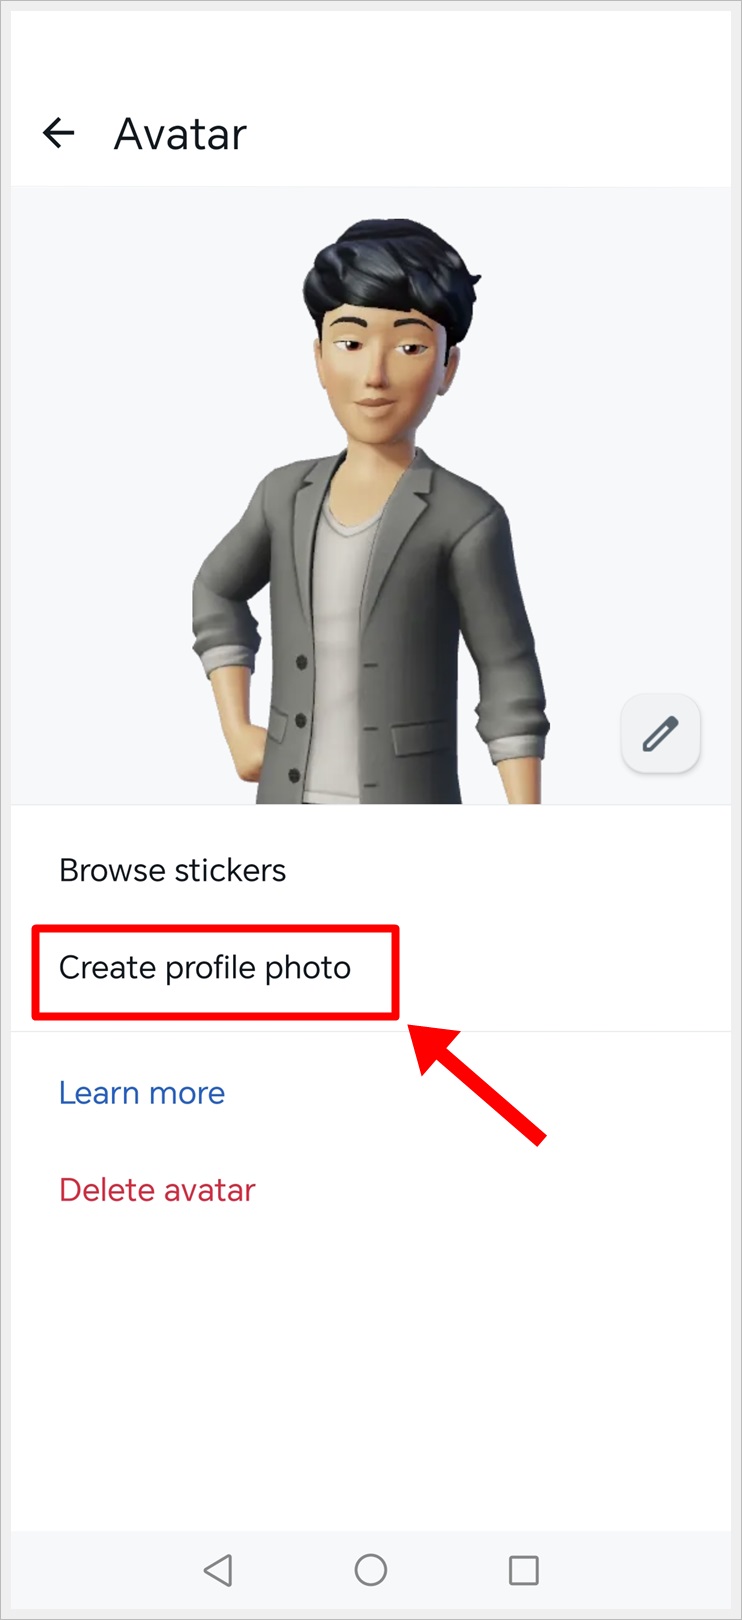 Select 'Create Profile Photo' in the 'Avatar' page.